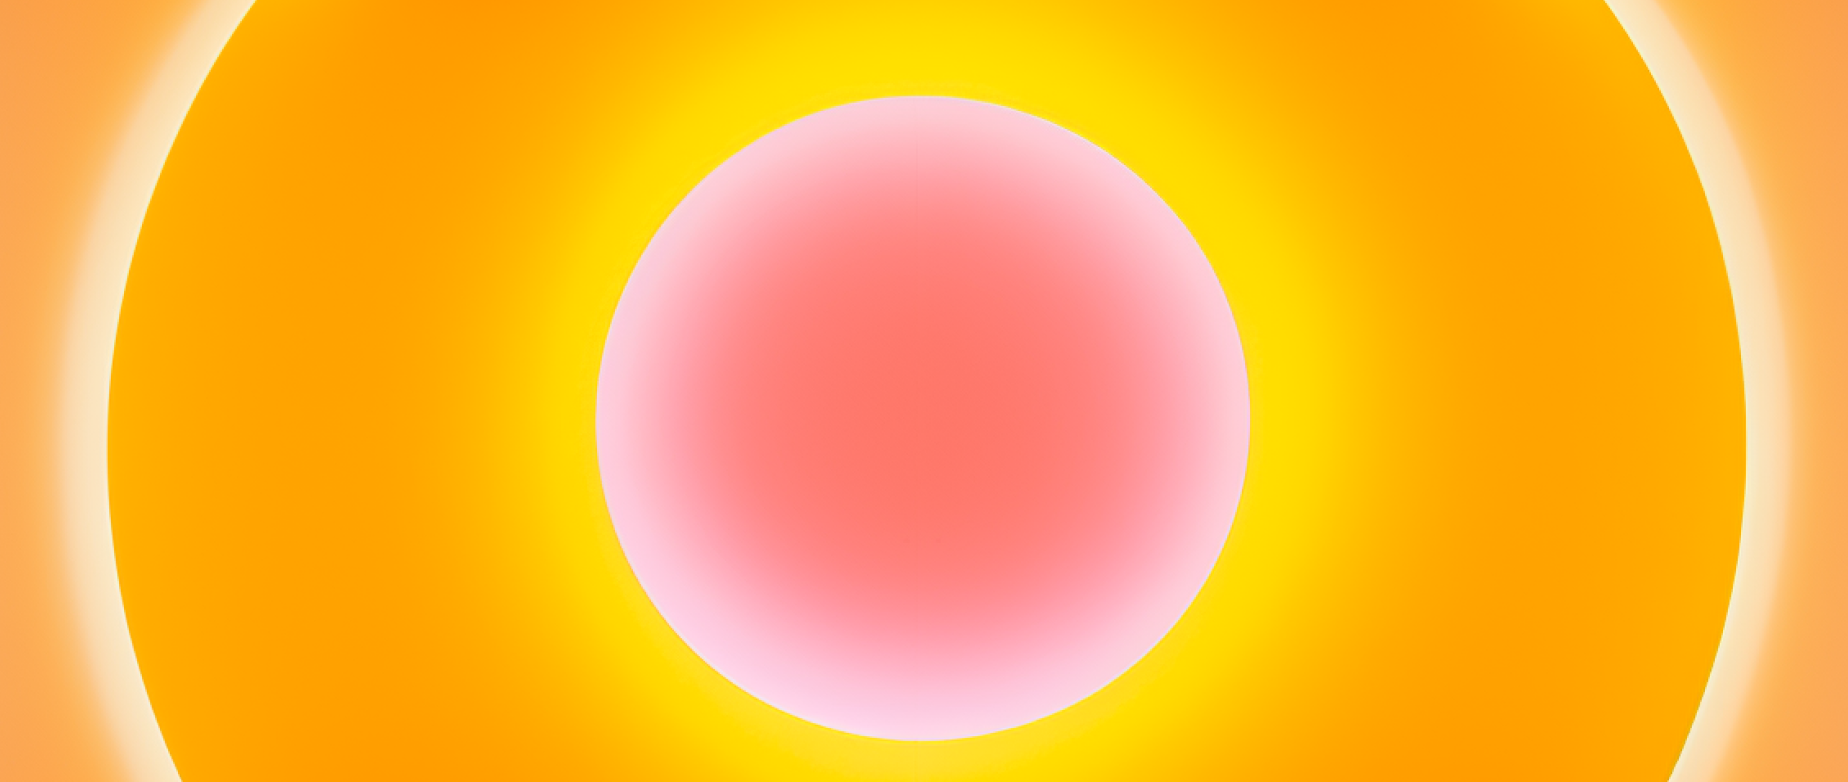 A pink ball inside yellow, white, and orange rings.